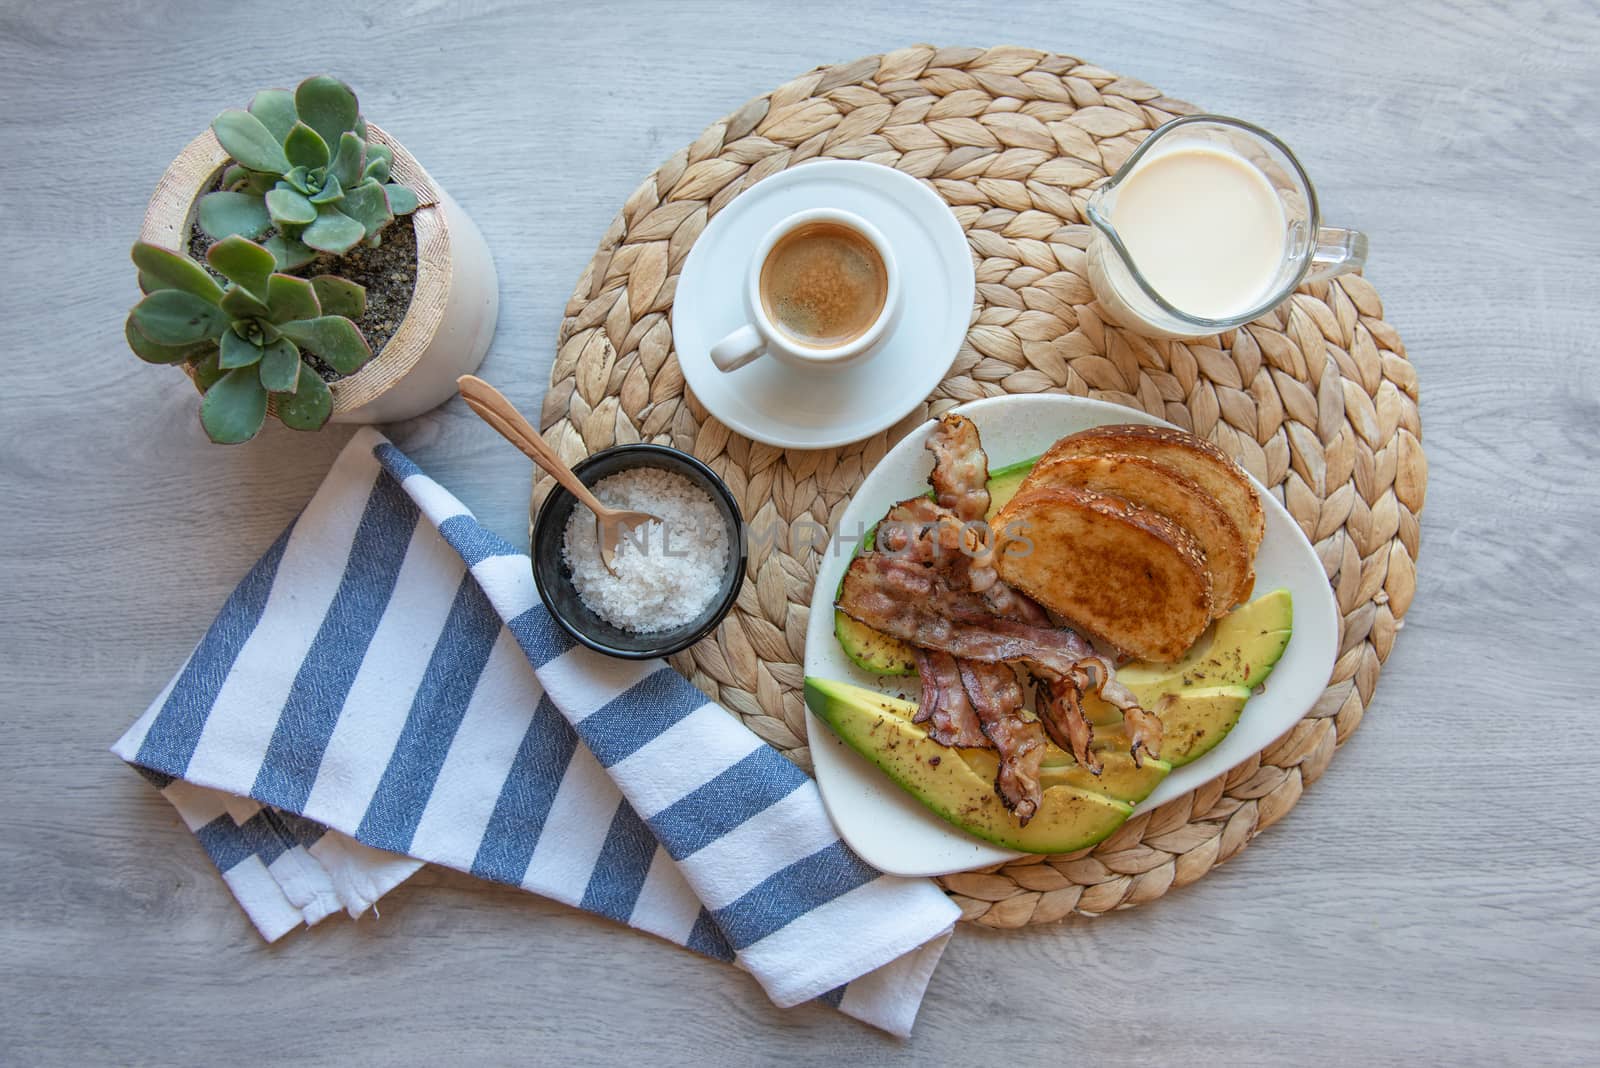 Fried bacon on white plate with cup of coffee, milk jug and toast. Breakfast on gray table